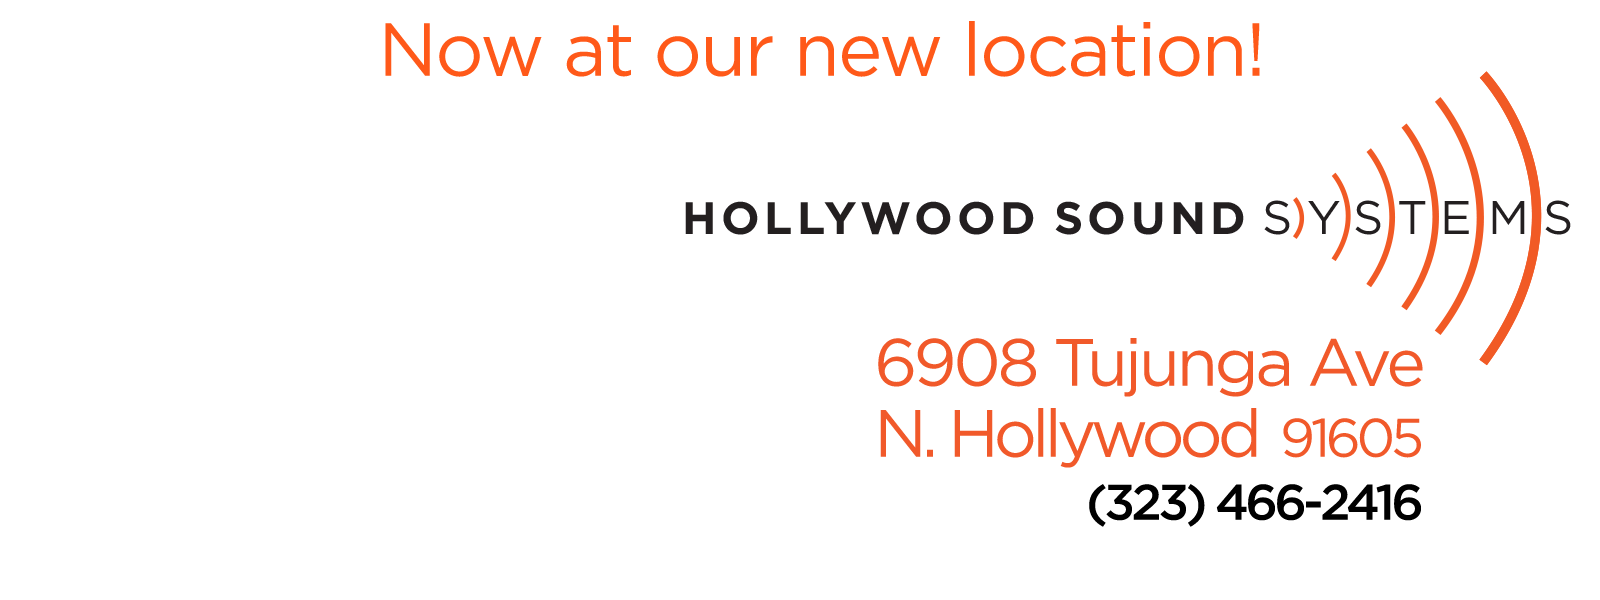 Hollywood Sound Systems